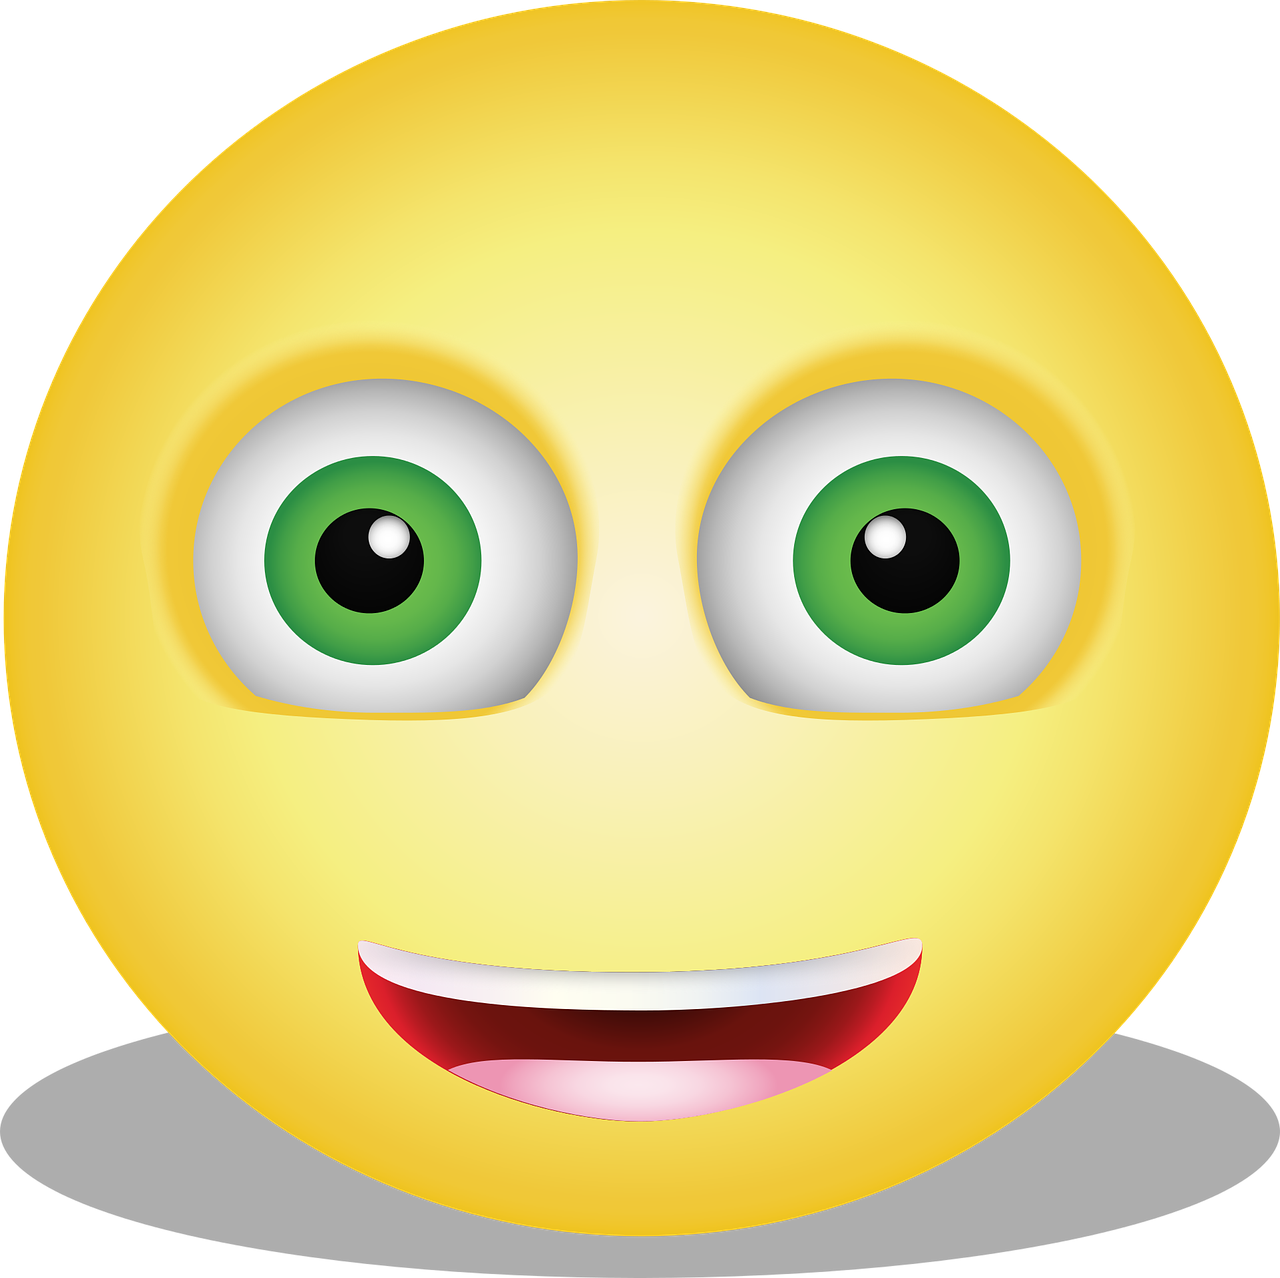 a yellow smiley face with green eyes, a digital rendering, mingei, realistic beautiful big eyes, !!! very coherent!!! vector art, it is glowing, smiling amazed